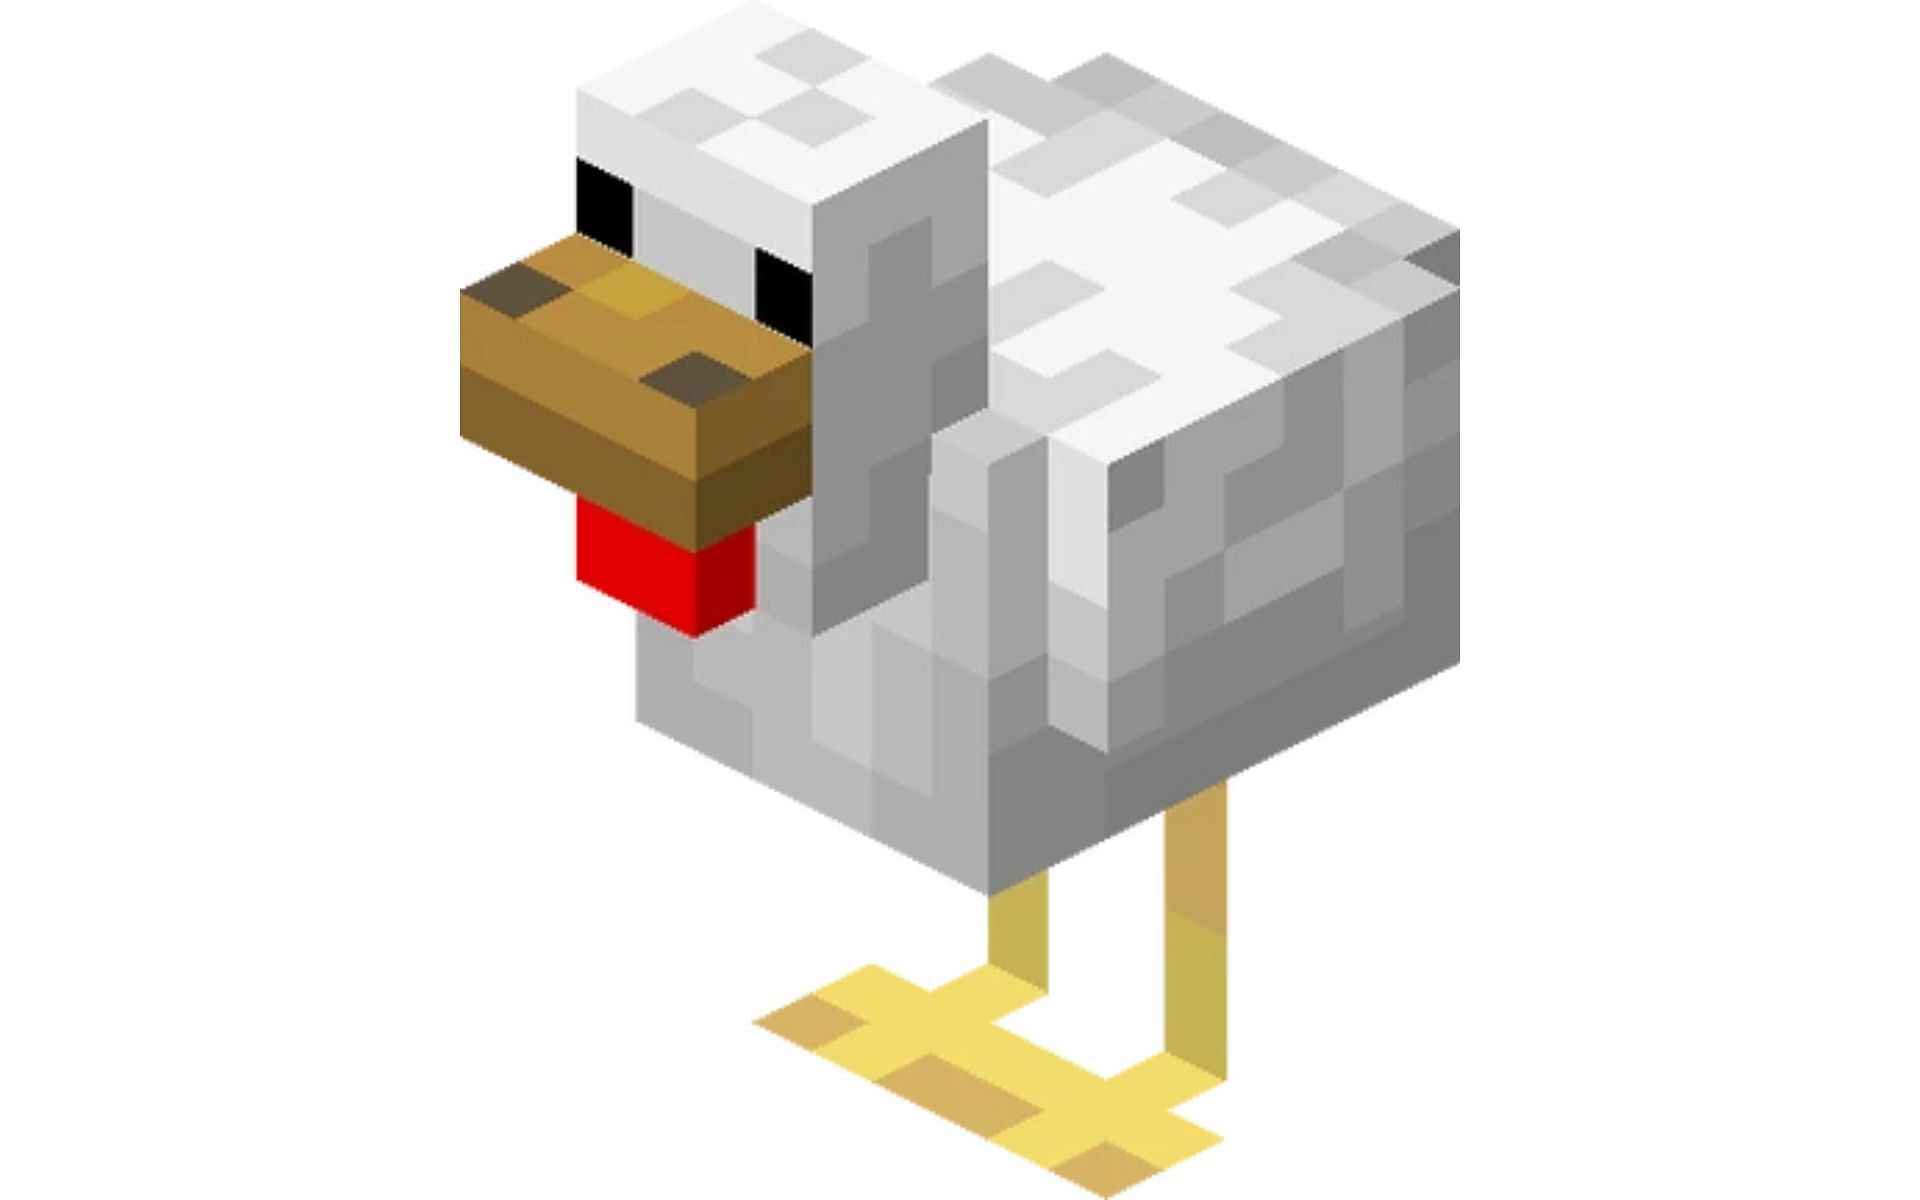 Chickens can provide players with many different materials to help them in their journey. (Image via Fandom)